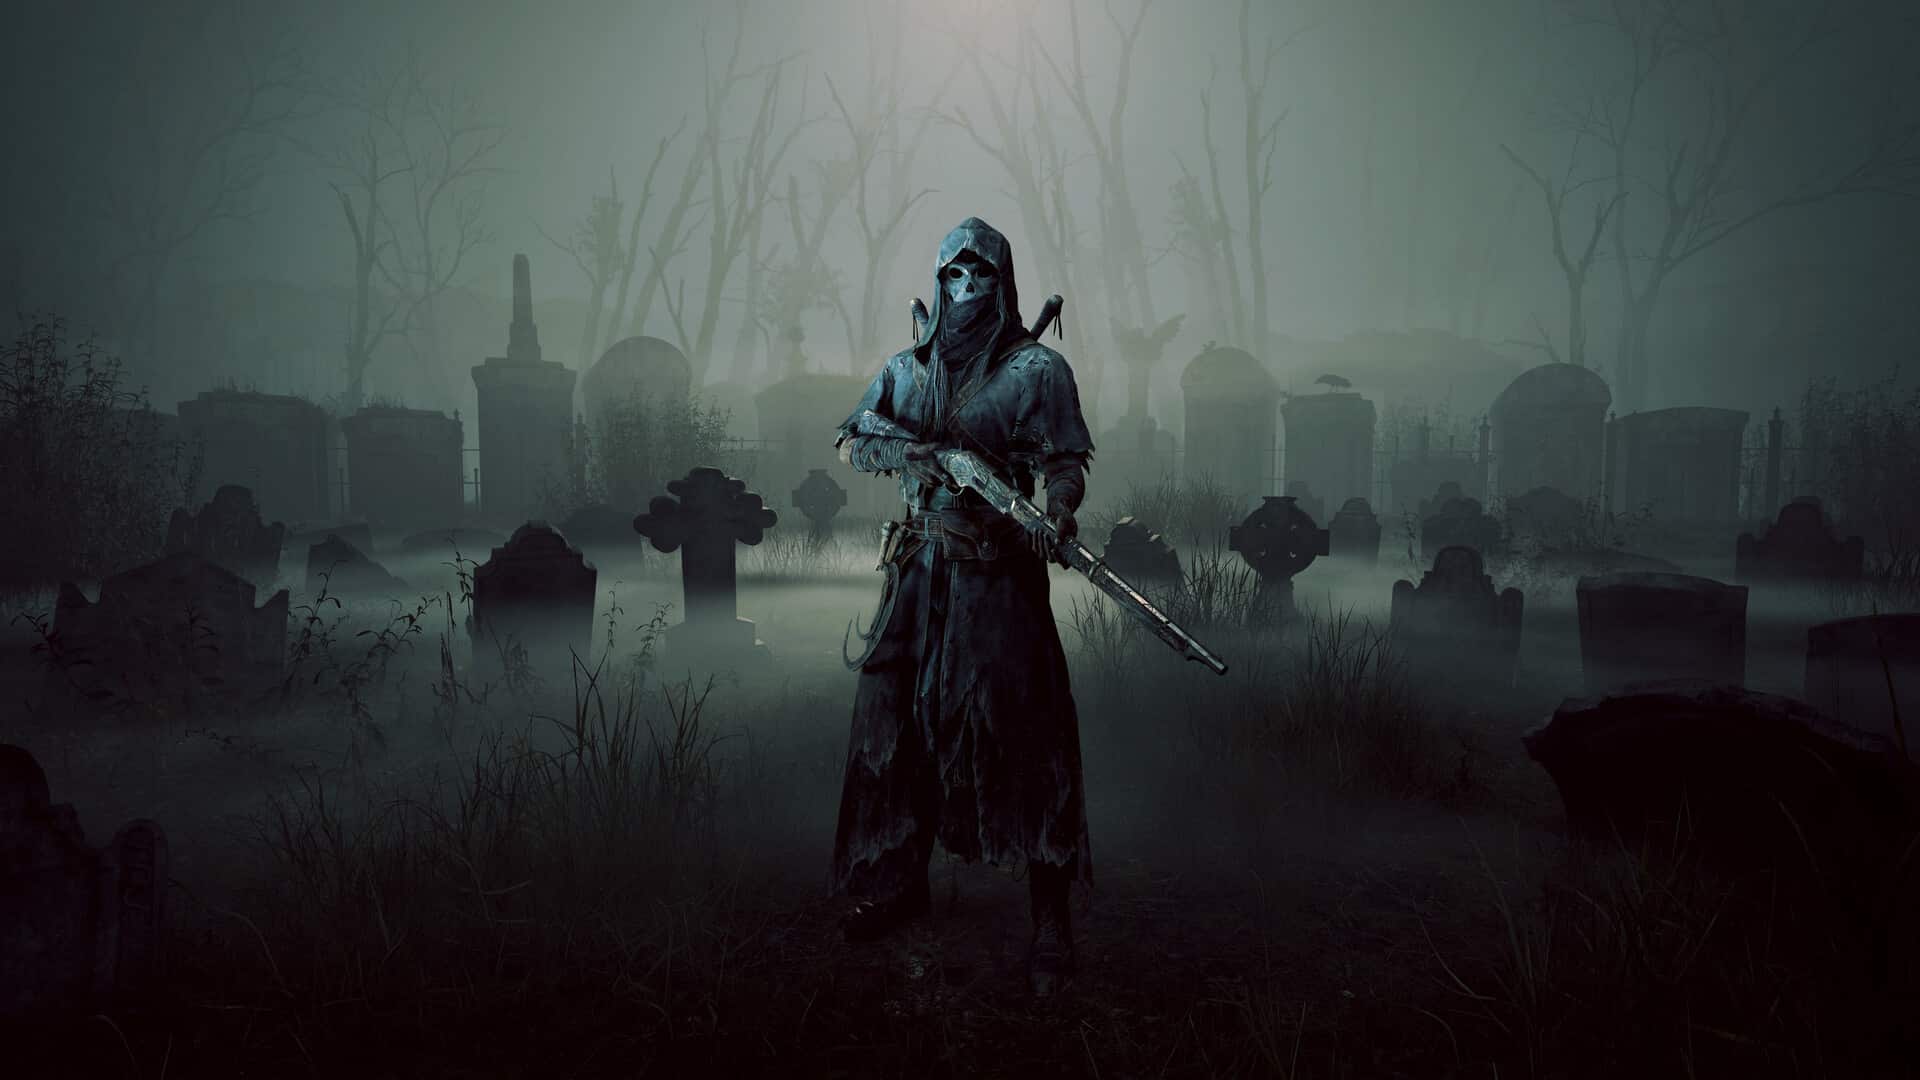 Hunt: Showdown Fear The Reaper DLC is now available on all platforms